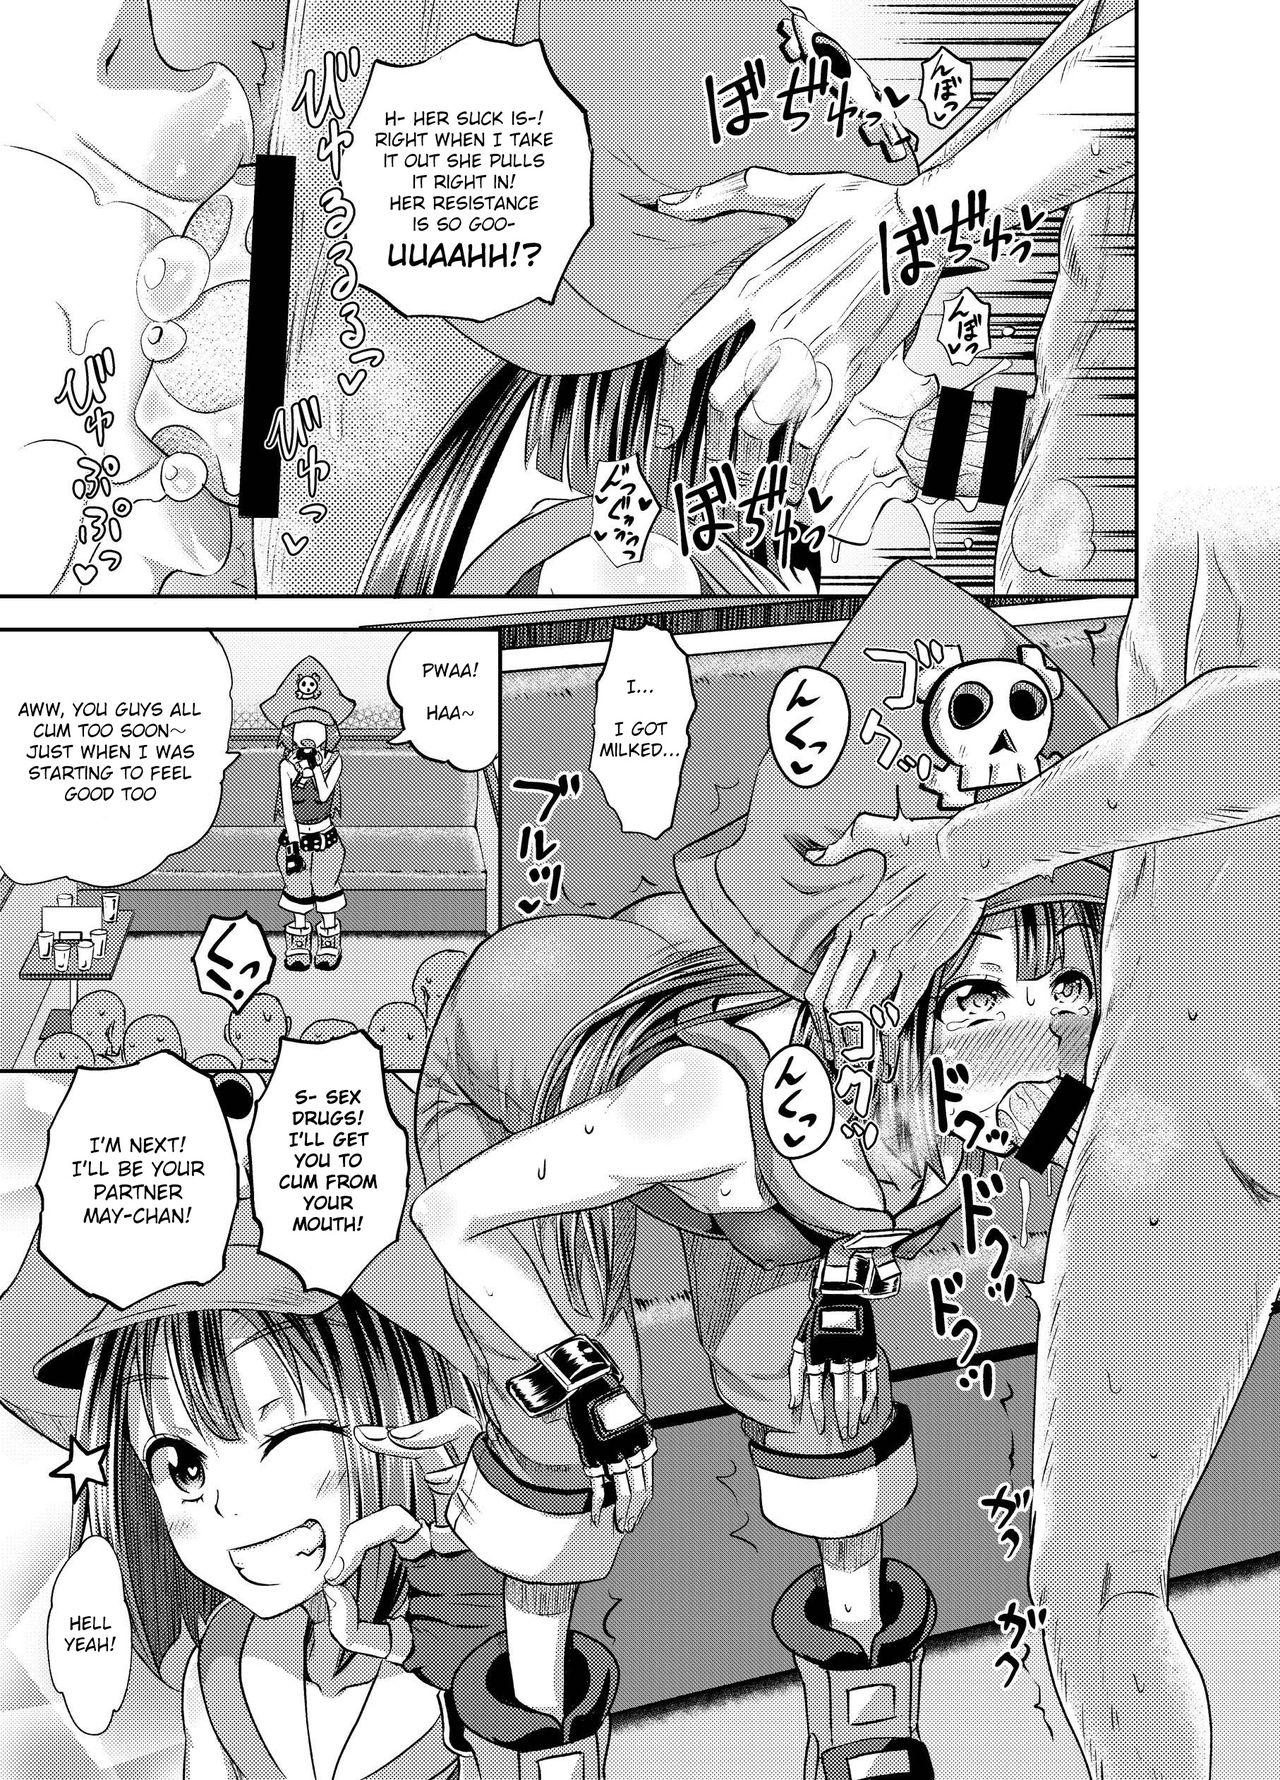 Stepmother Jellyfish Kaizokudan e Youkoso! | Welcome to The Jellyfish Pleasure Club! - Guilty gear Jacking Off - Page 10